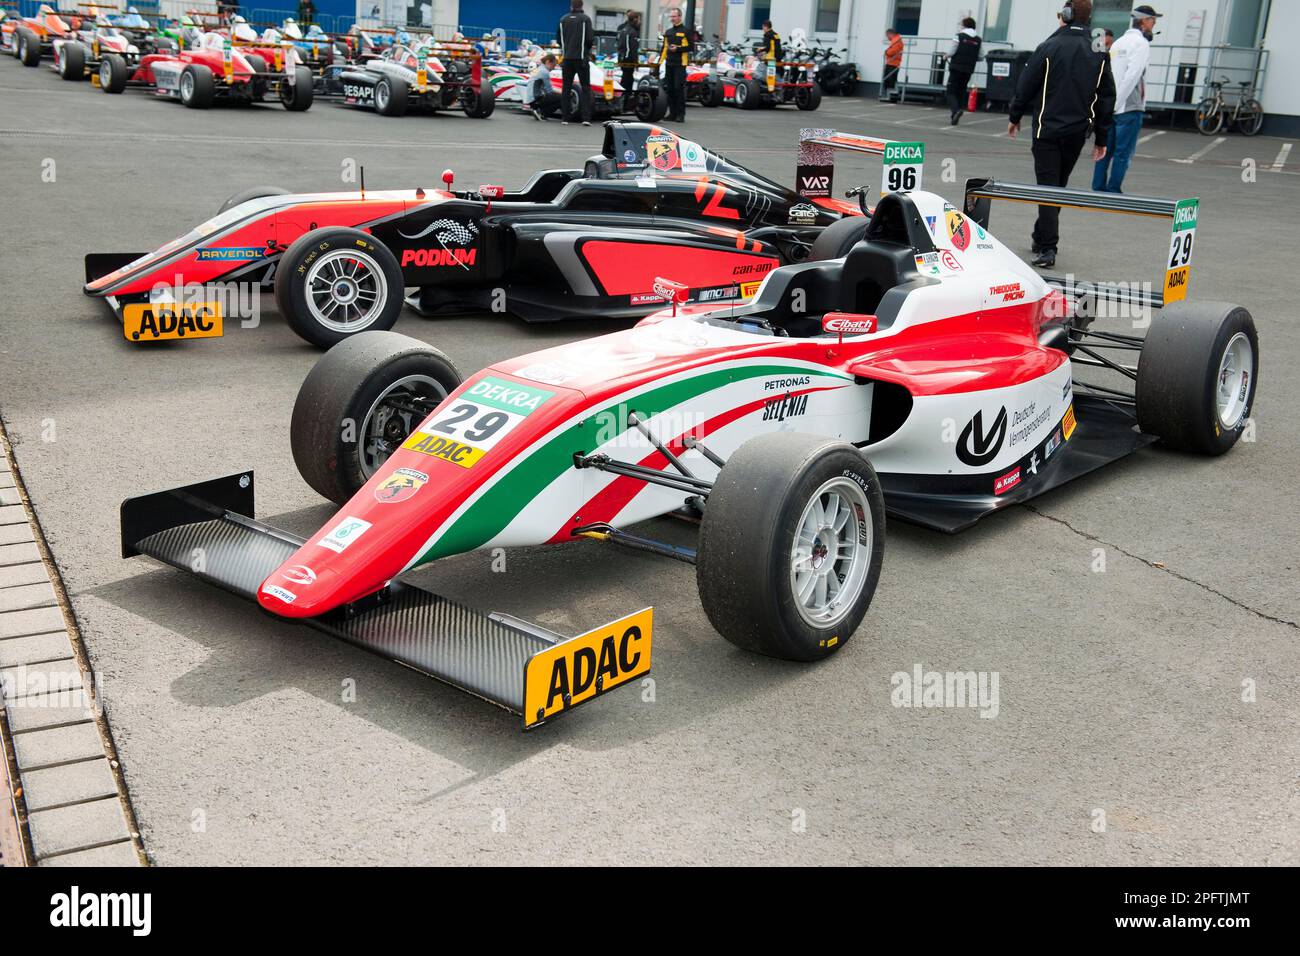 F4 racing car of Mick Schumacher, son of Michael Schumacher, Nuerburgring race track, Rhineland-Palatinate, Germany Stock Photo